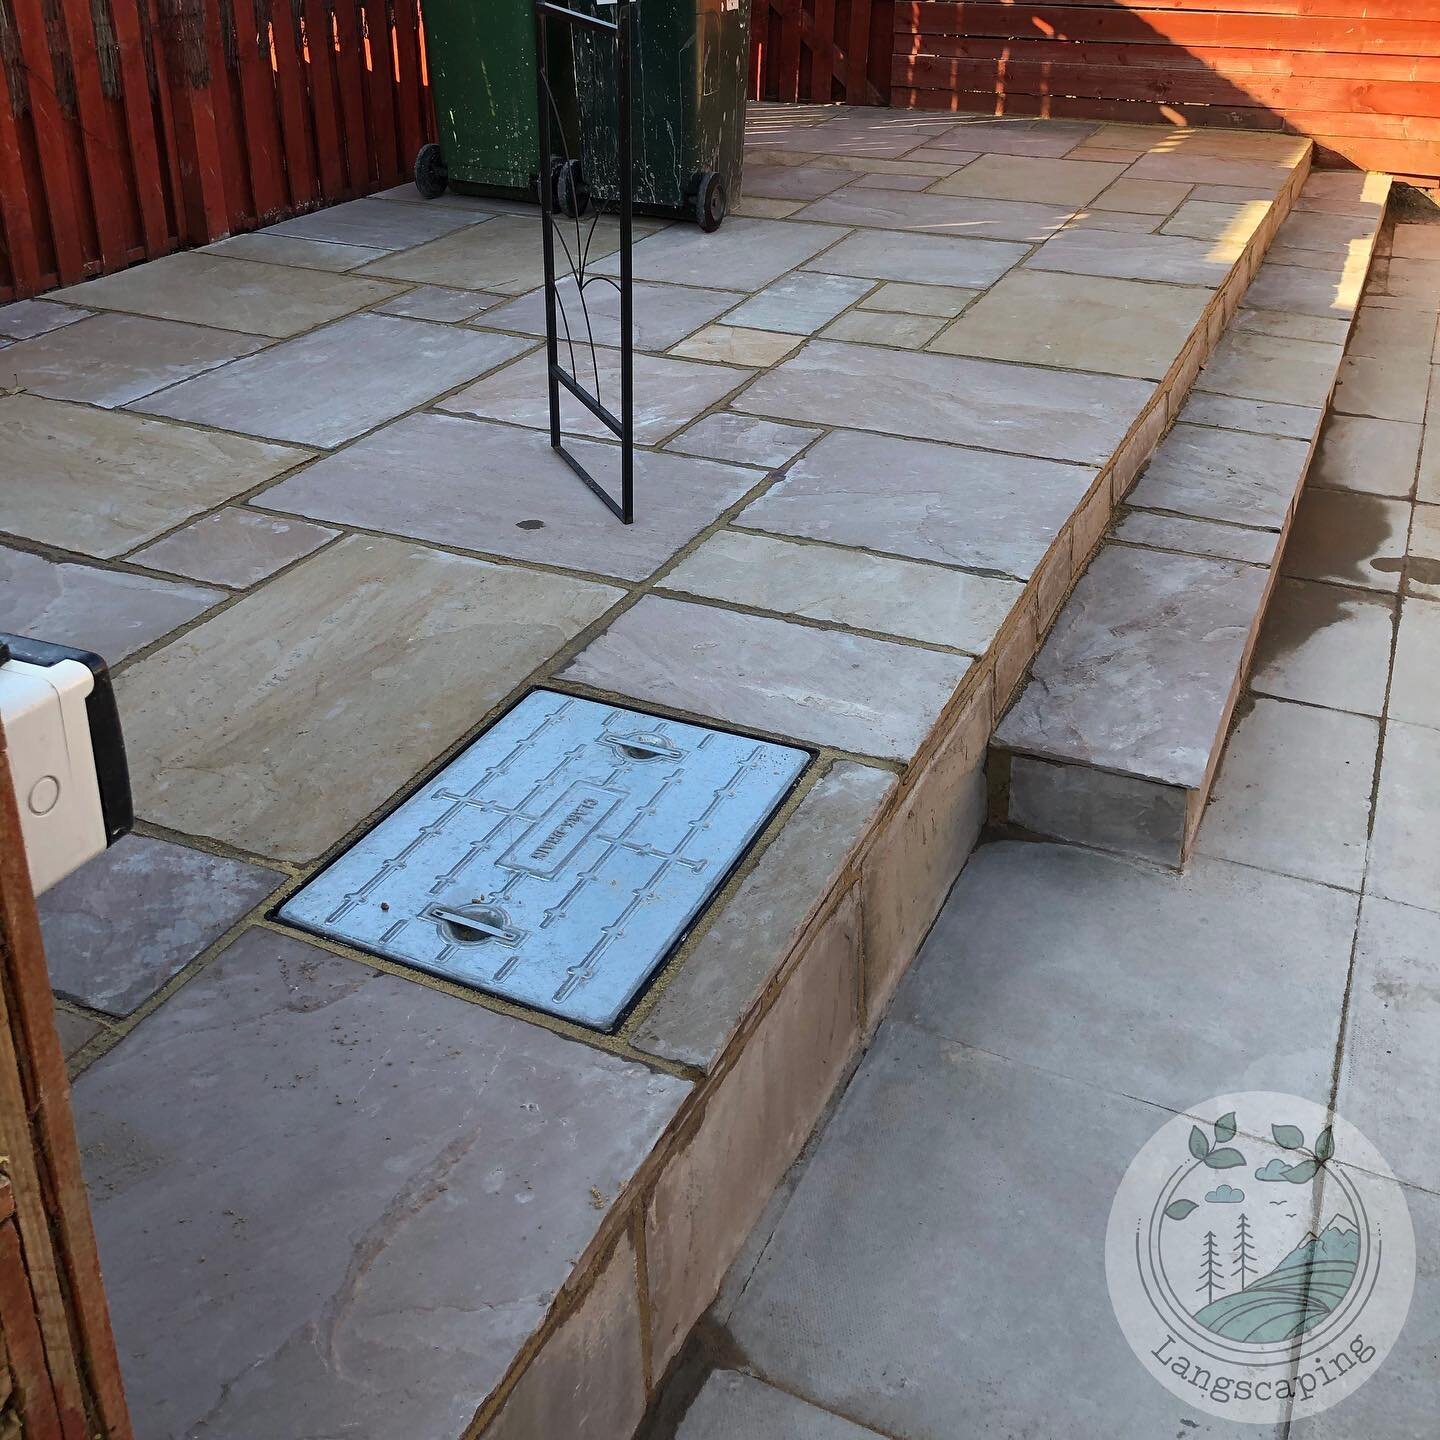 Another week, another patio.. Why not get a patio done in your garden so you can enjoy a solo socially distanced bbq in style?
#landscaping #landscape #landscapedesign #landscapingideas #landscapingcompany #gardendesign #nature #design #architecture 